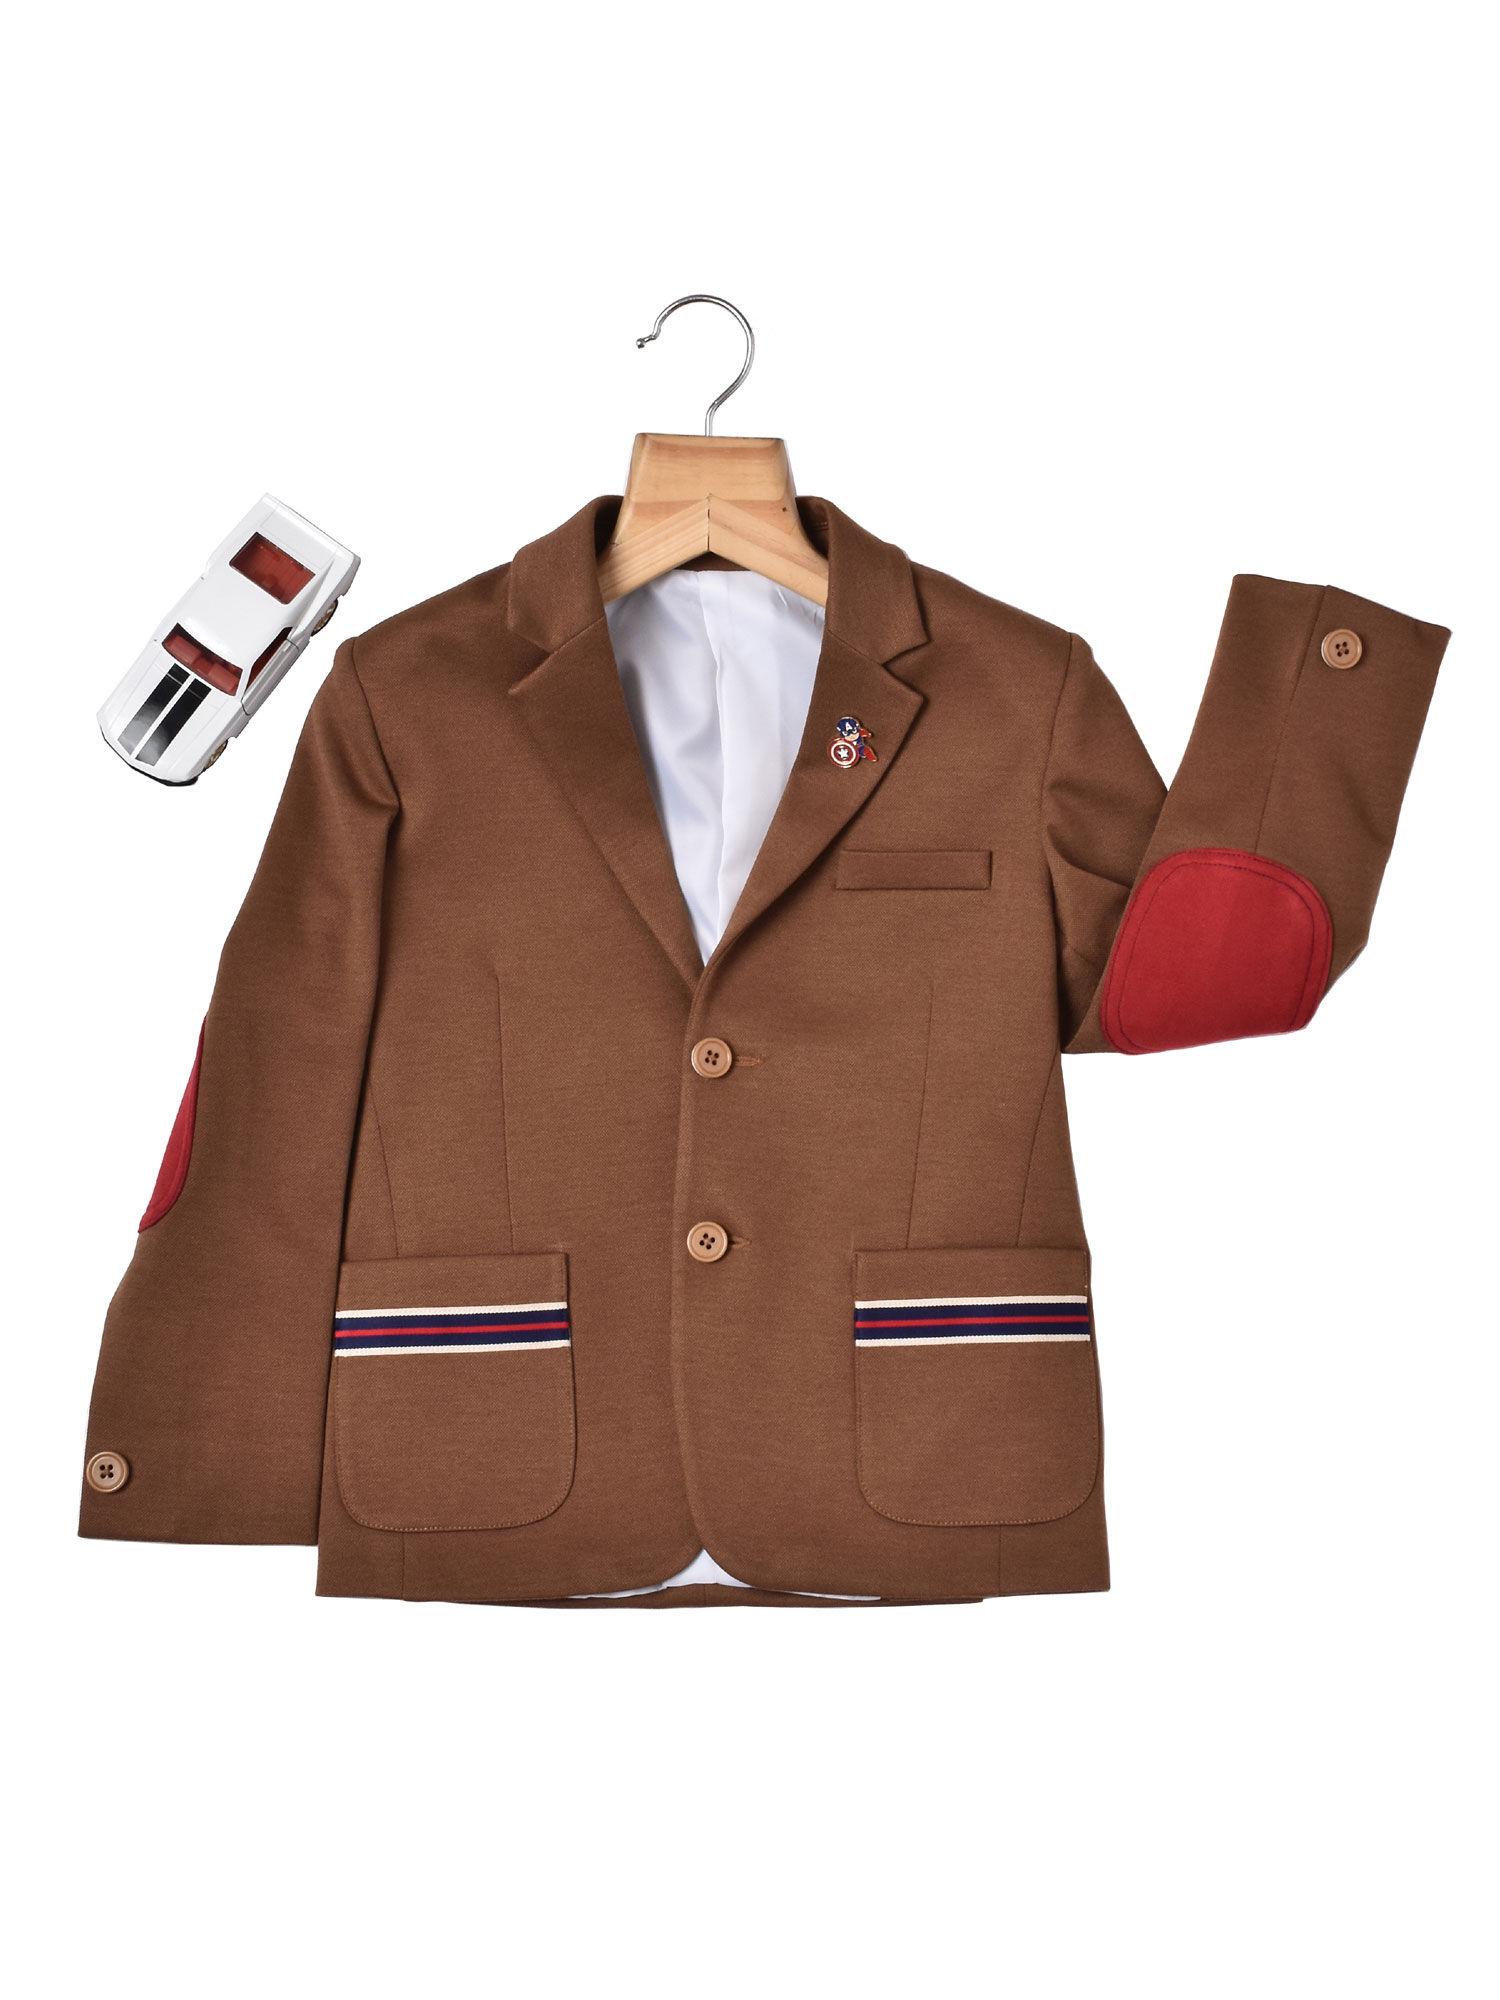 Bronze Blazer with Detailing On Pockets and Maroon Elbow Patch